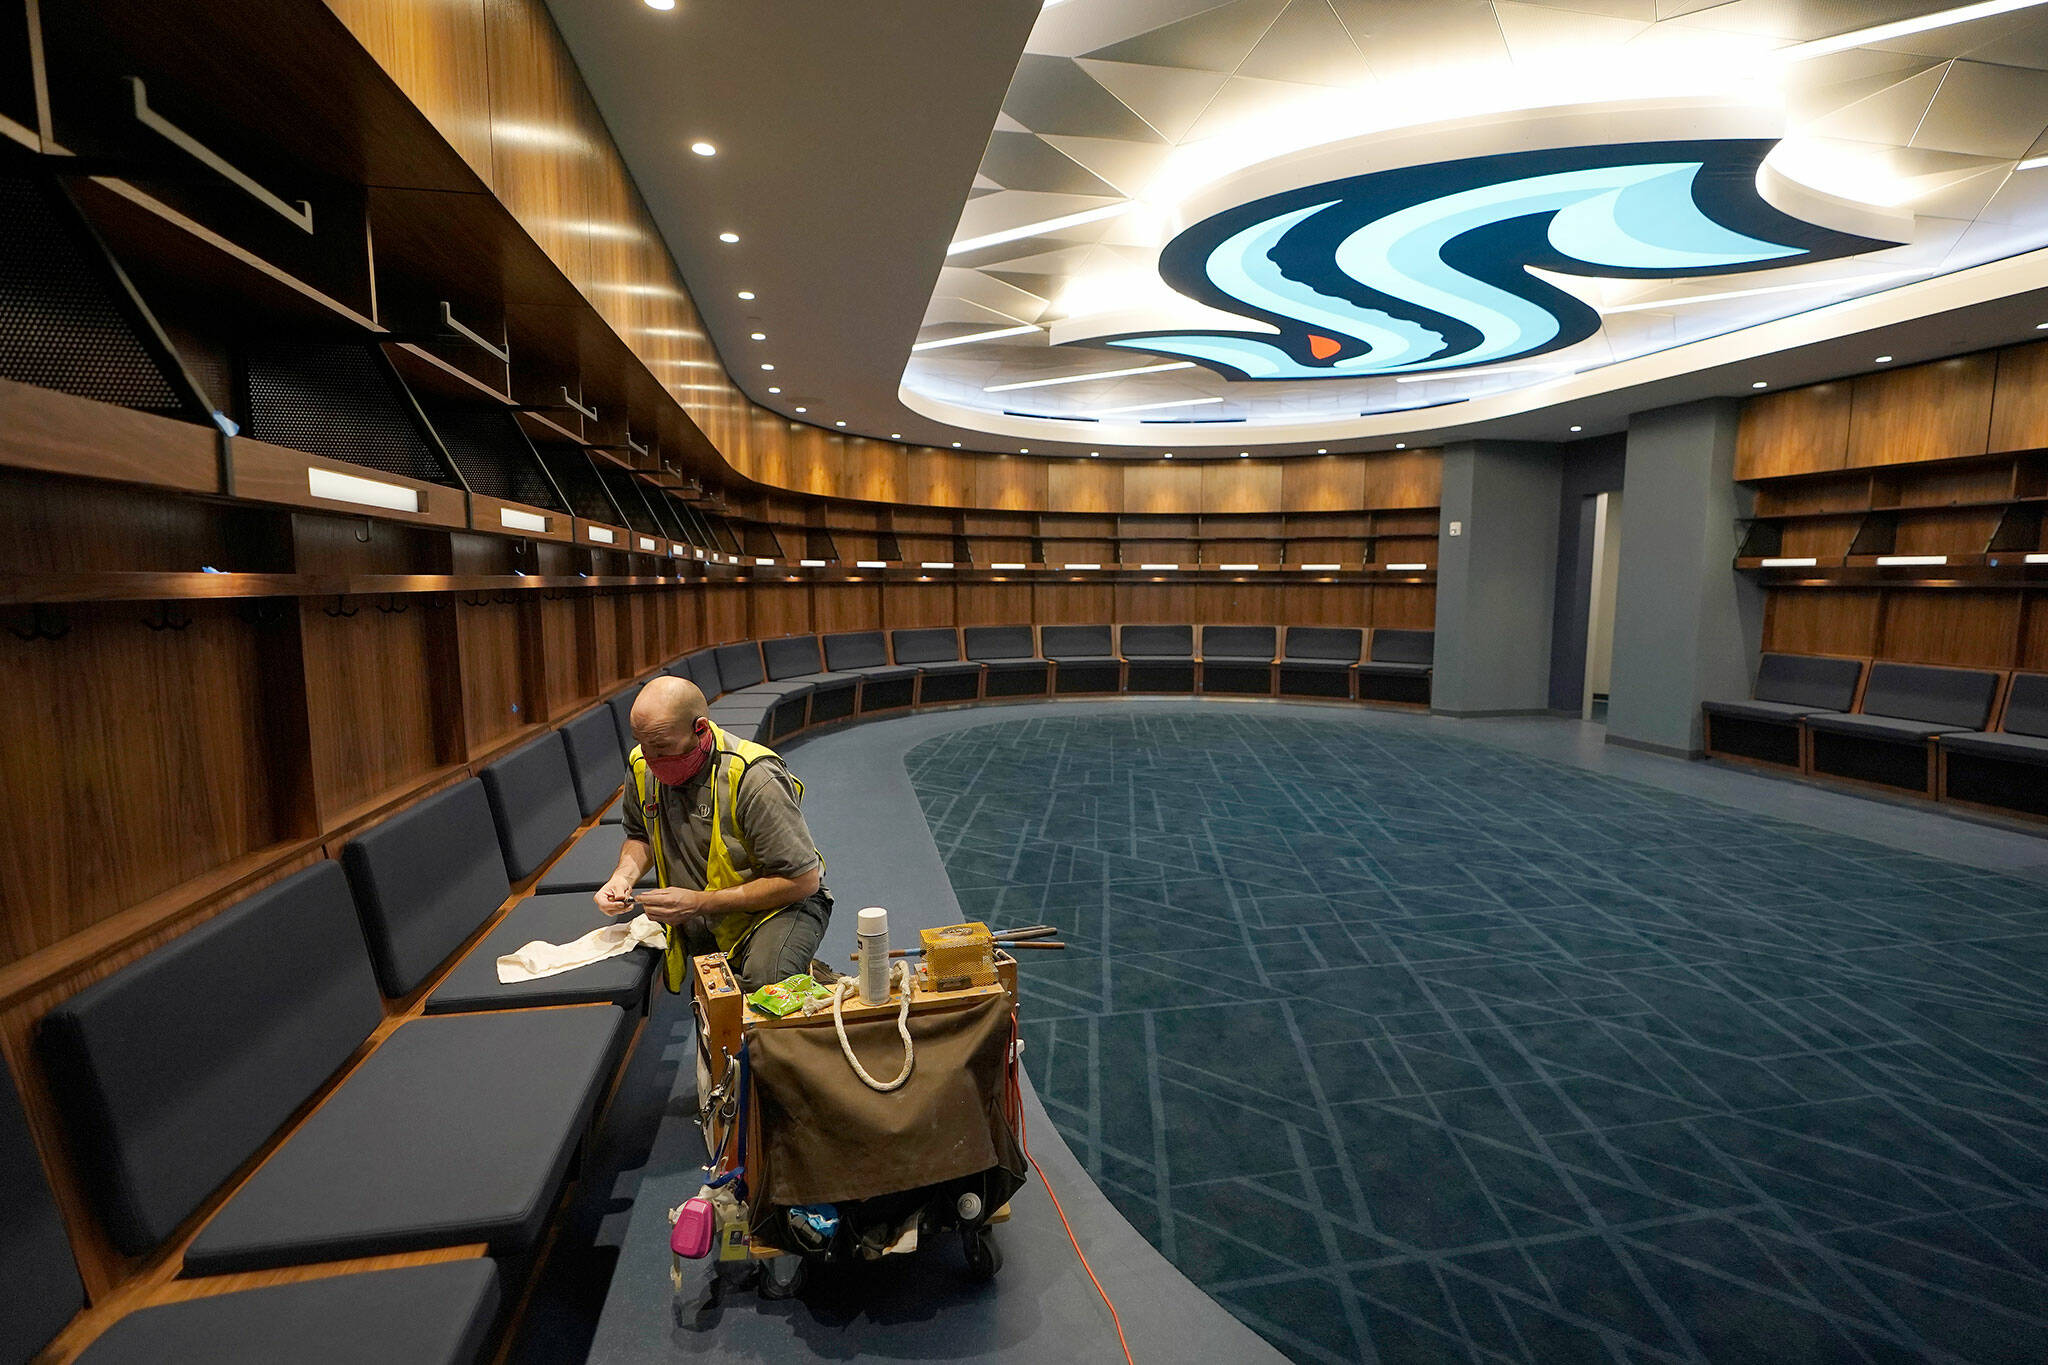 A worker puts the final touches on woodwork in the Seattle Kraken’s locker room at Climate Pledge Arena on Wednesday during a media tour ahead of the team’s home opener Saturday against the Vancouver Canucks in Seattle. (AP Photo/Ted S. Warren)